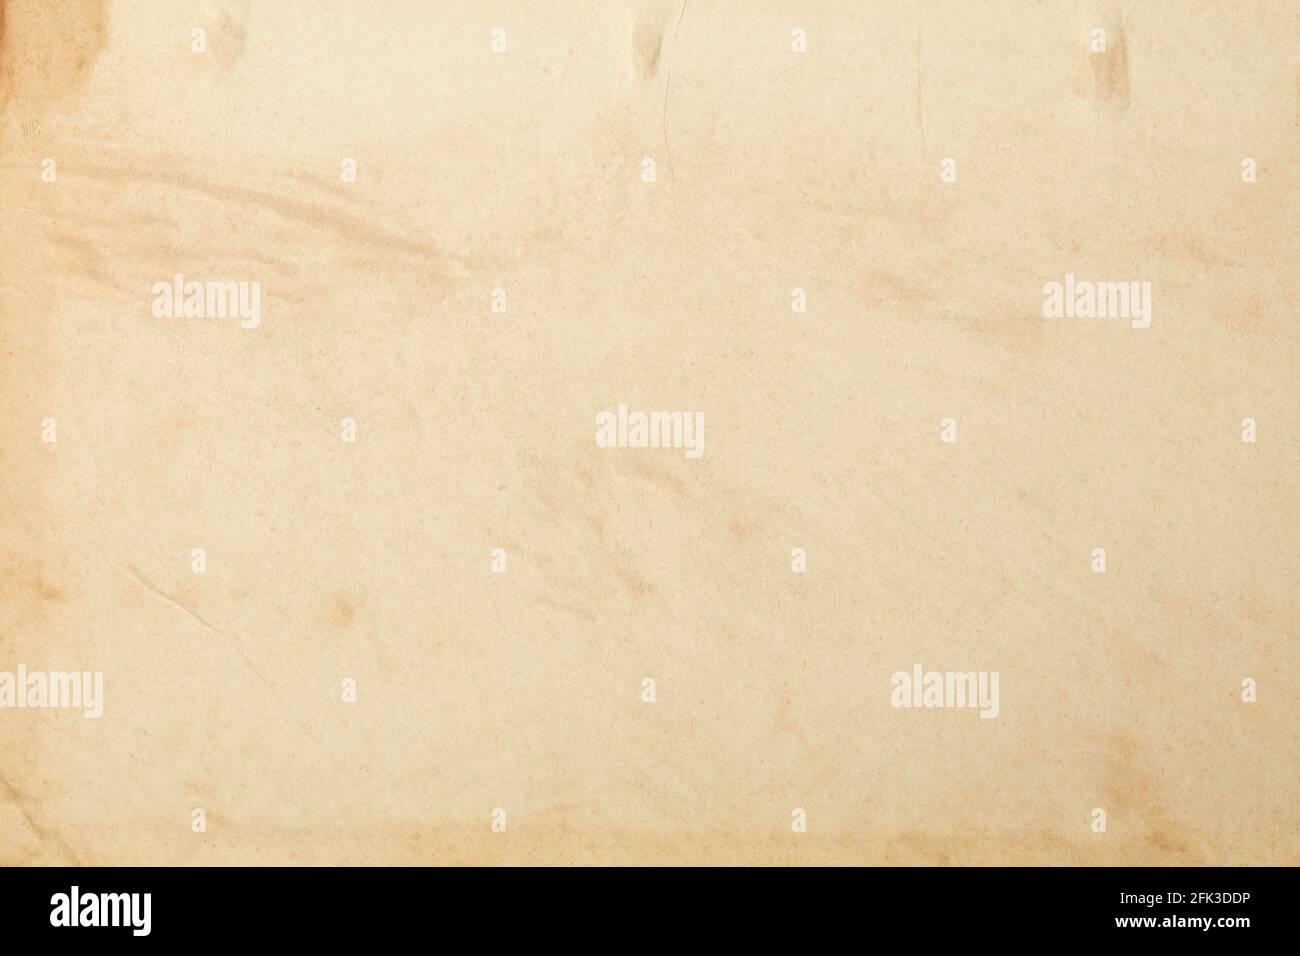 Old paper with stains and humidity signs texture background Stock Photo